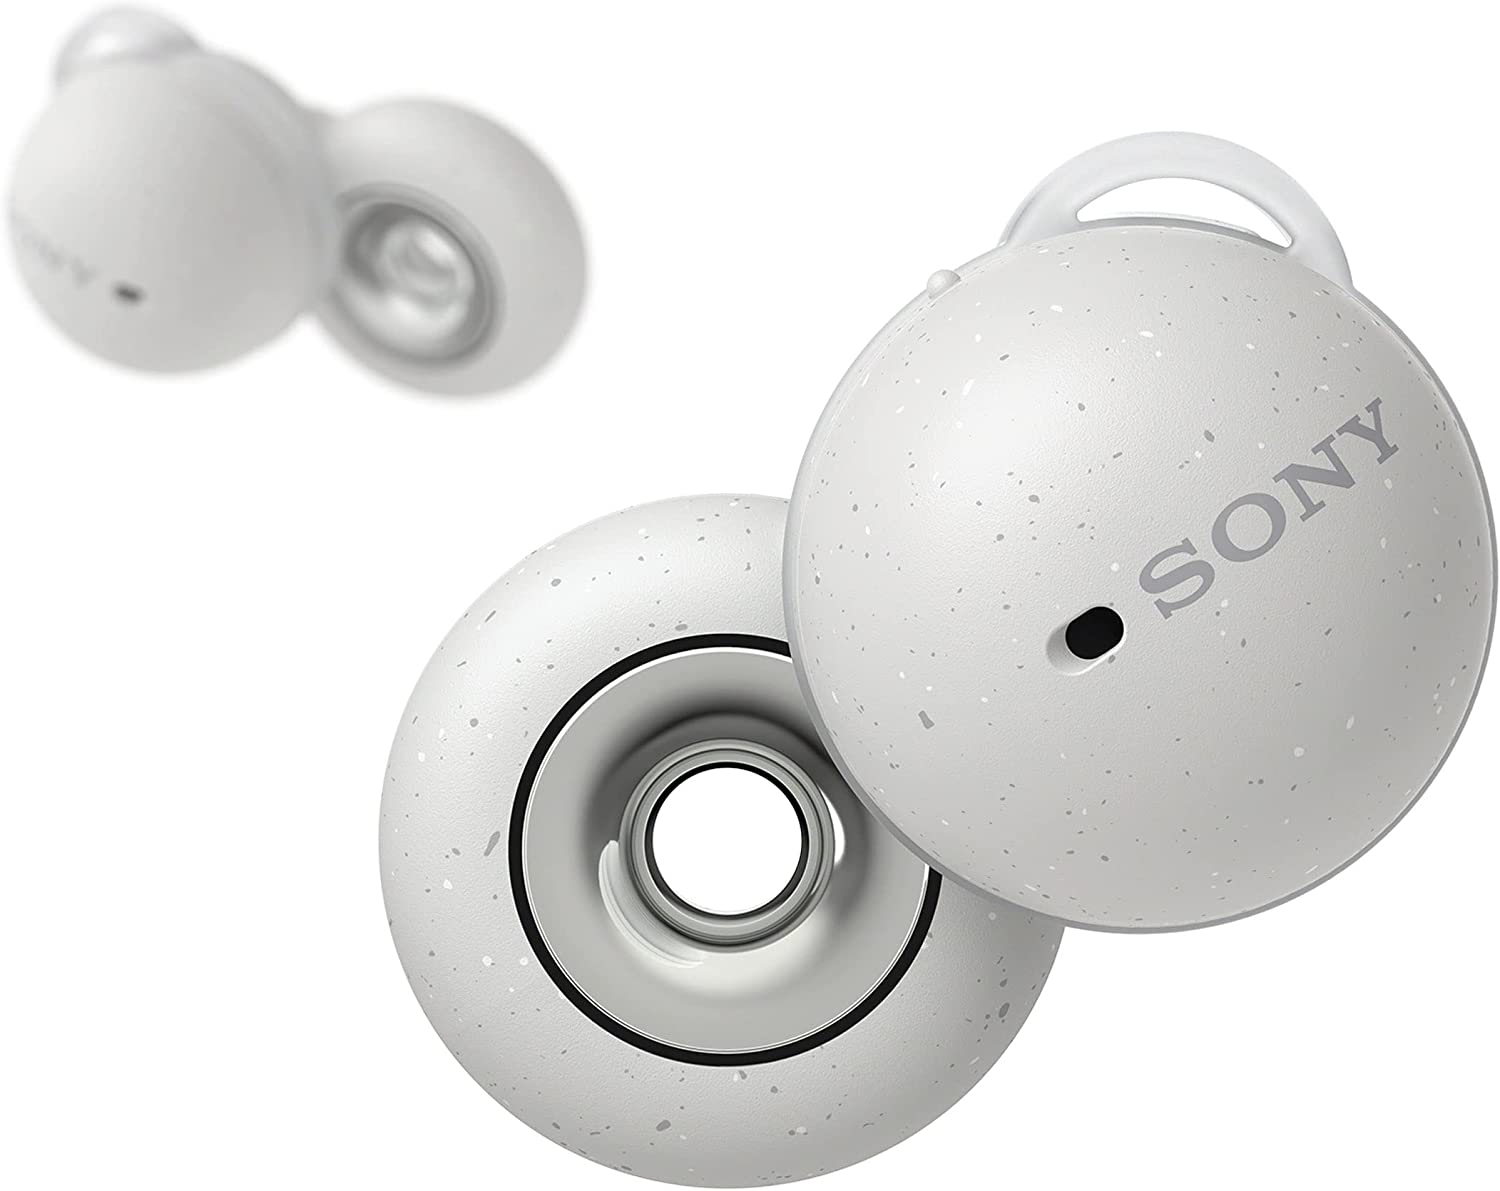 Sony LinkBuds Truly Wireless Earbud Headphones with an Open-Ring Design for Ambient Sounds and Alexa Built-in, White